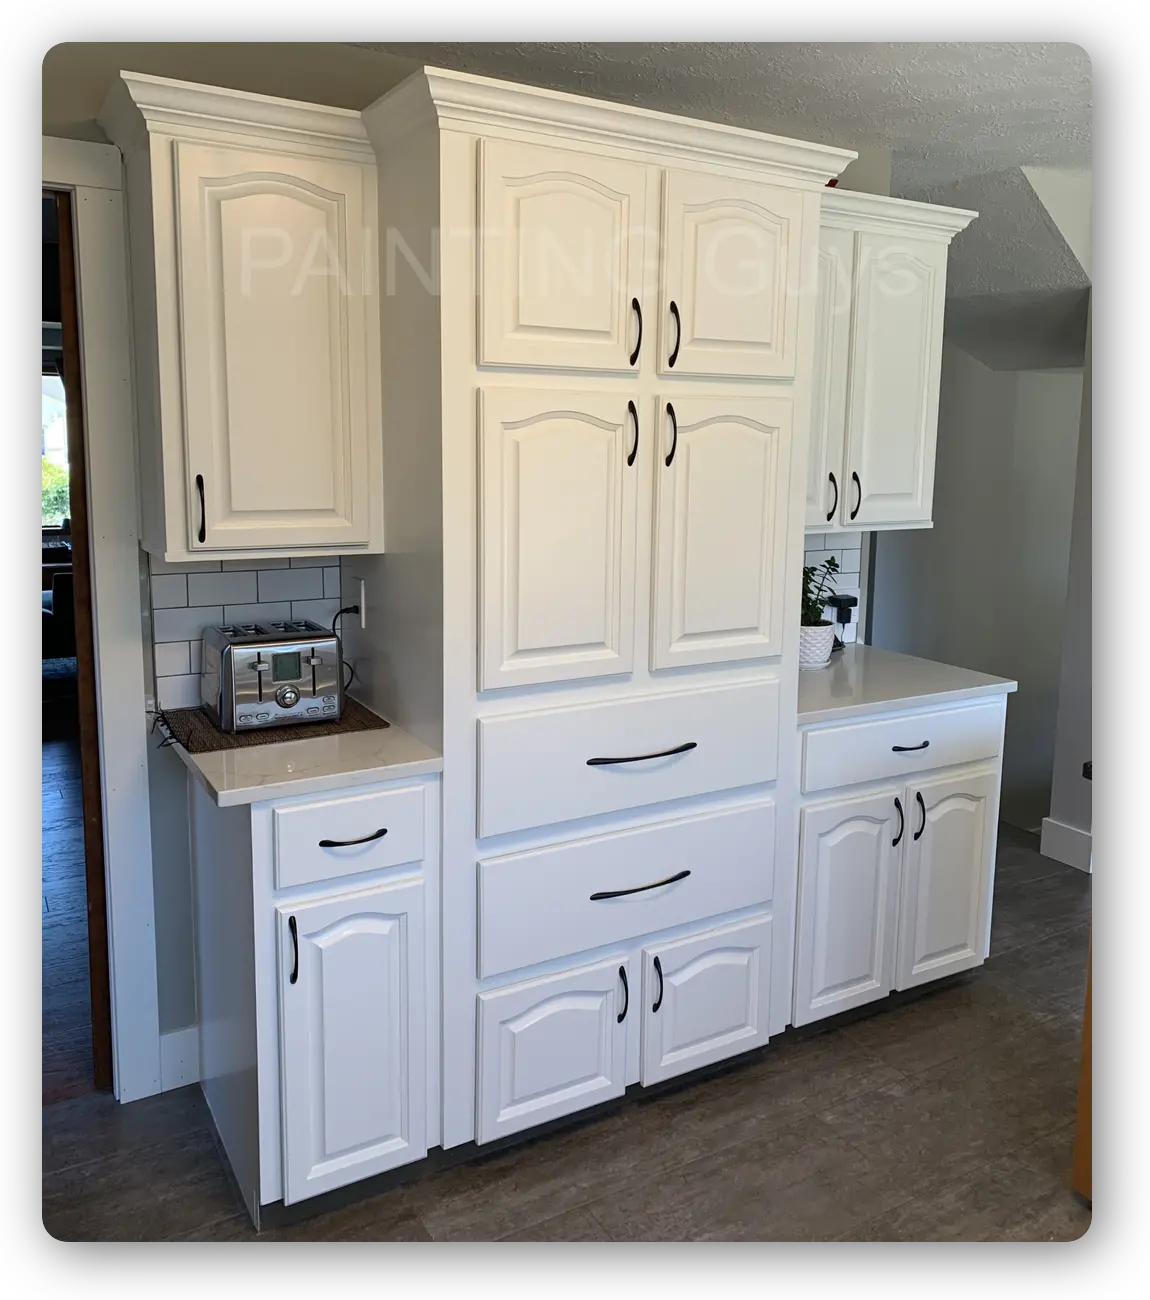 Oak cabinets refinished in Cloud White - Karly